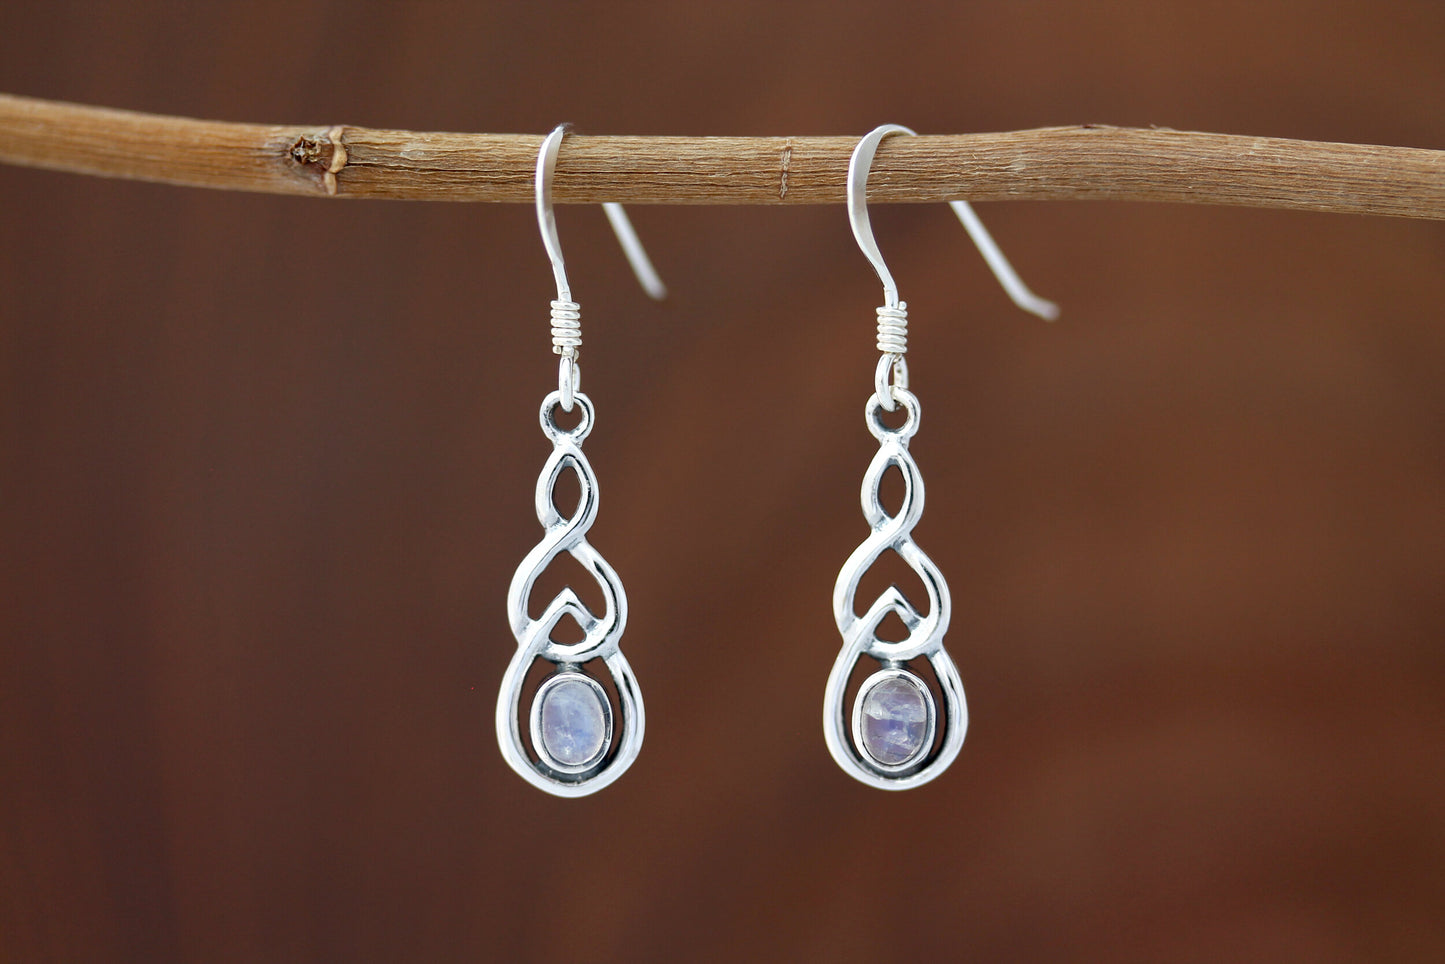 Celtic Knot Earrings - Interlocked Arms with Moonstone